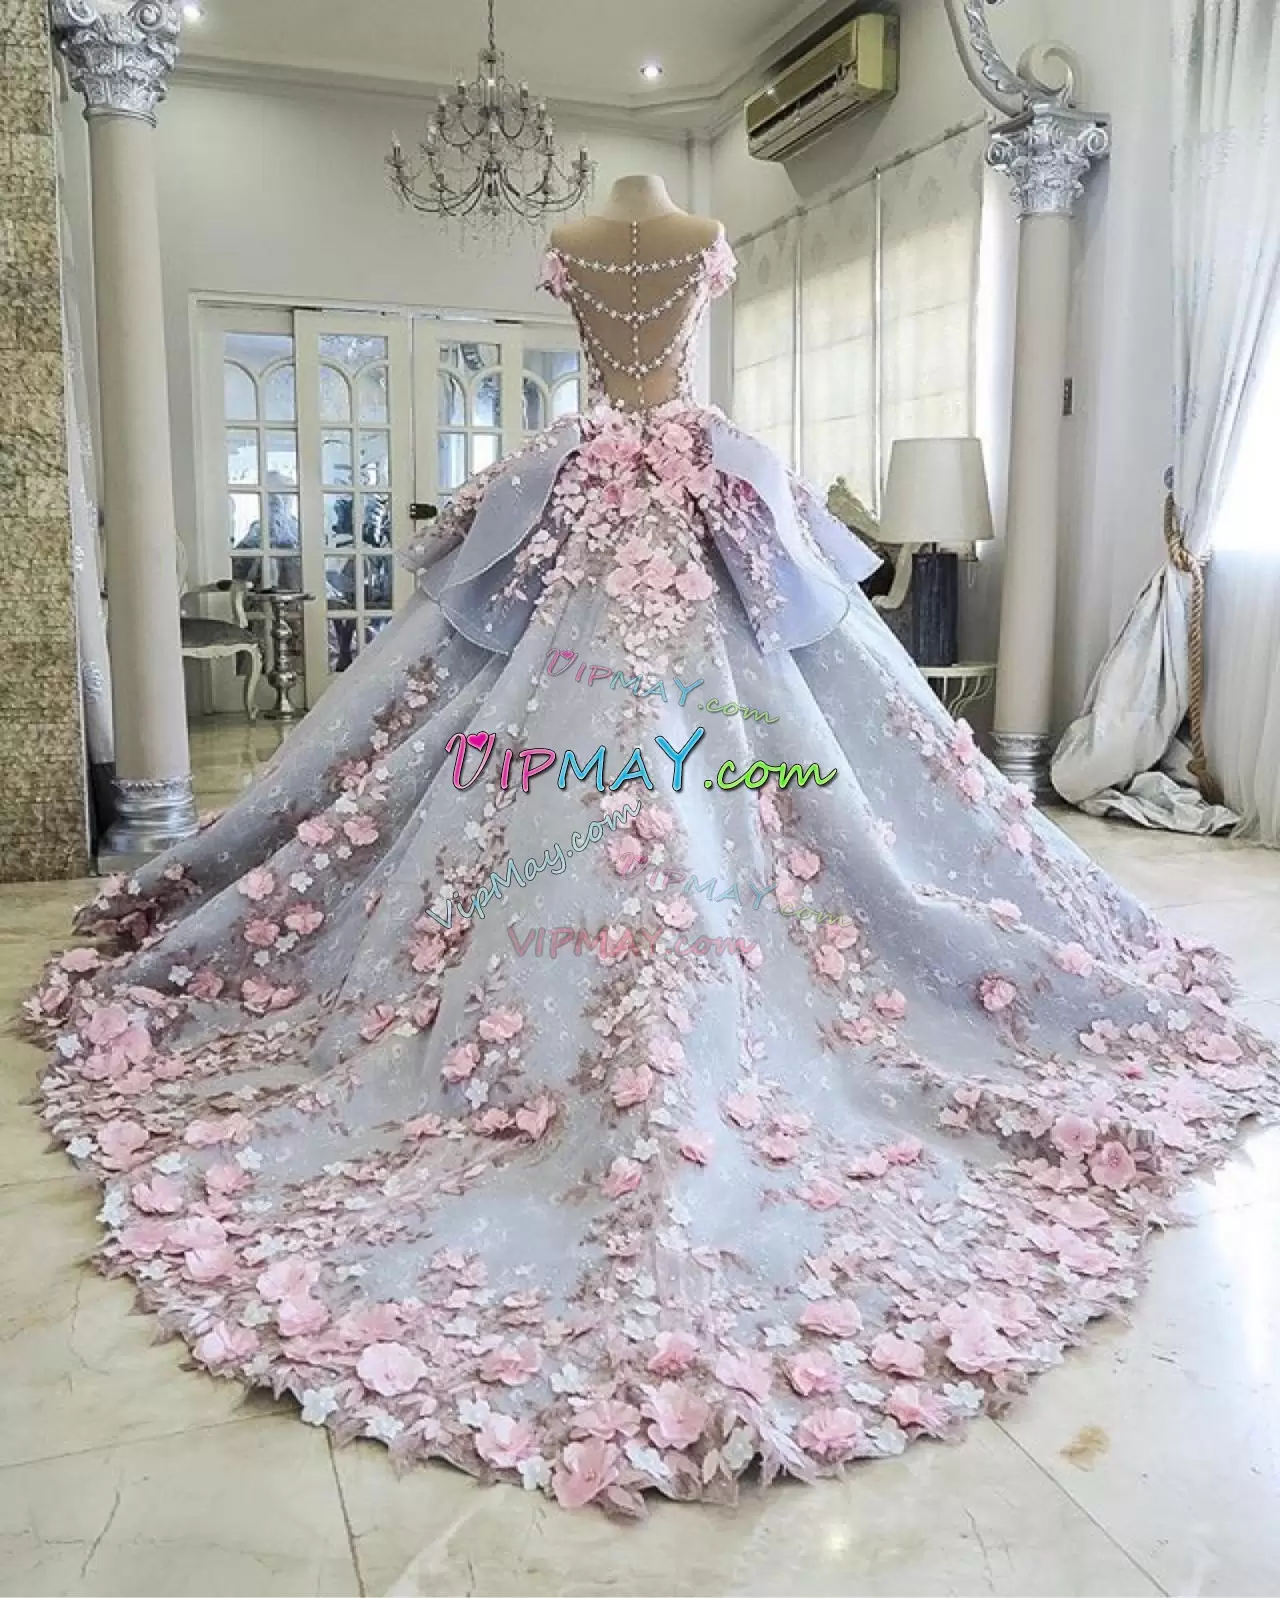 quinceanera dress without people,quinceanera dress 2020,see through bodice quinceanera dress,satin and tulle quinceanera dress,quinceanera dress with 3d flowers,quinceanera dress with long trains,quinceanera dress with a train,quinceanera dress with long train,handmade flower quinceanera dress,satin gown with beaded waist and illusion back,custom made quinceanera dress houston tx,